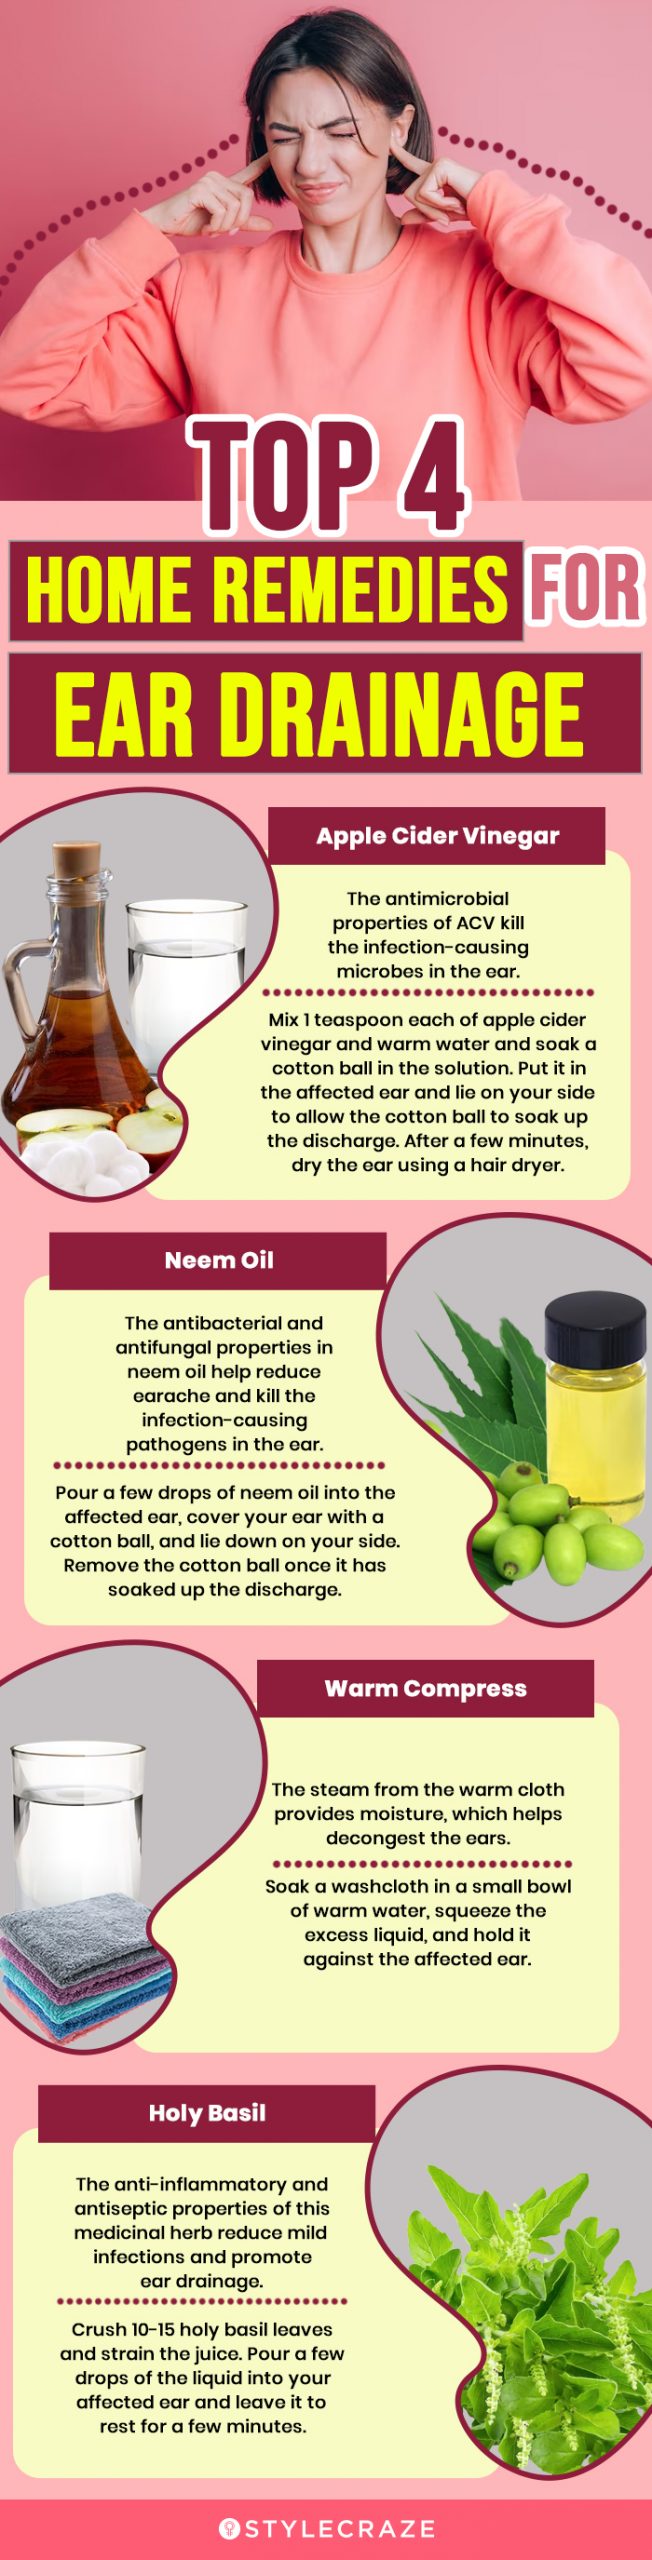 Home remedies for baby ear infection